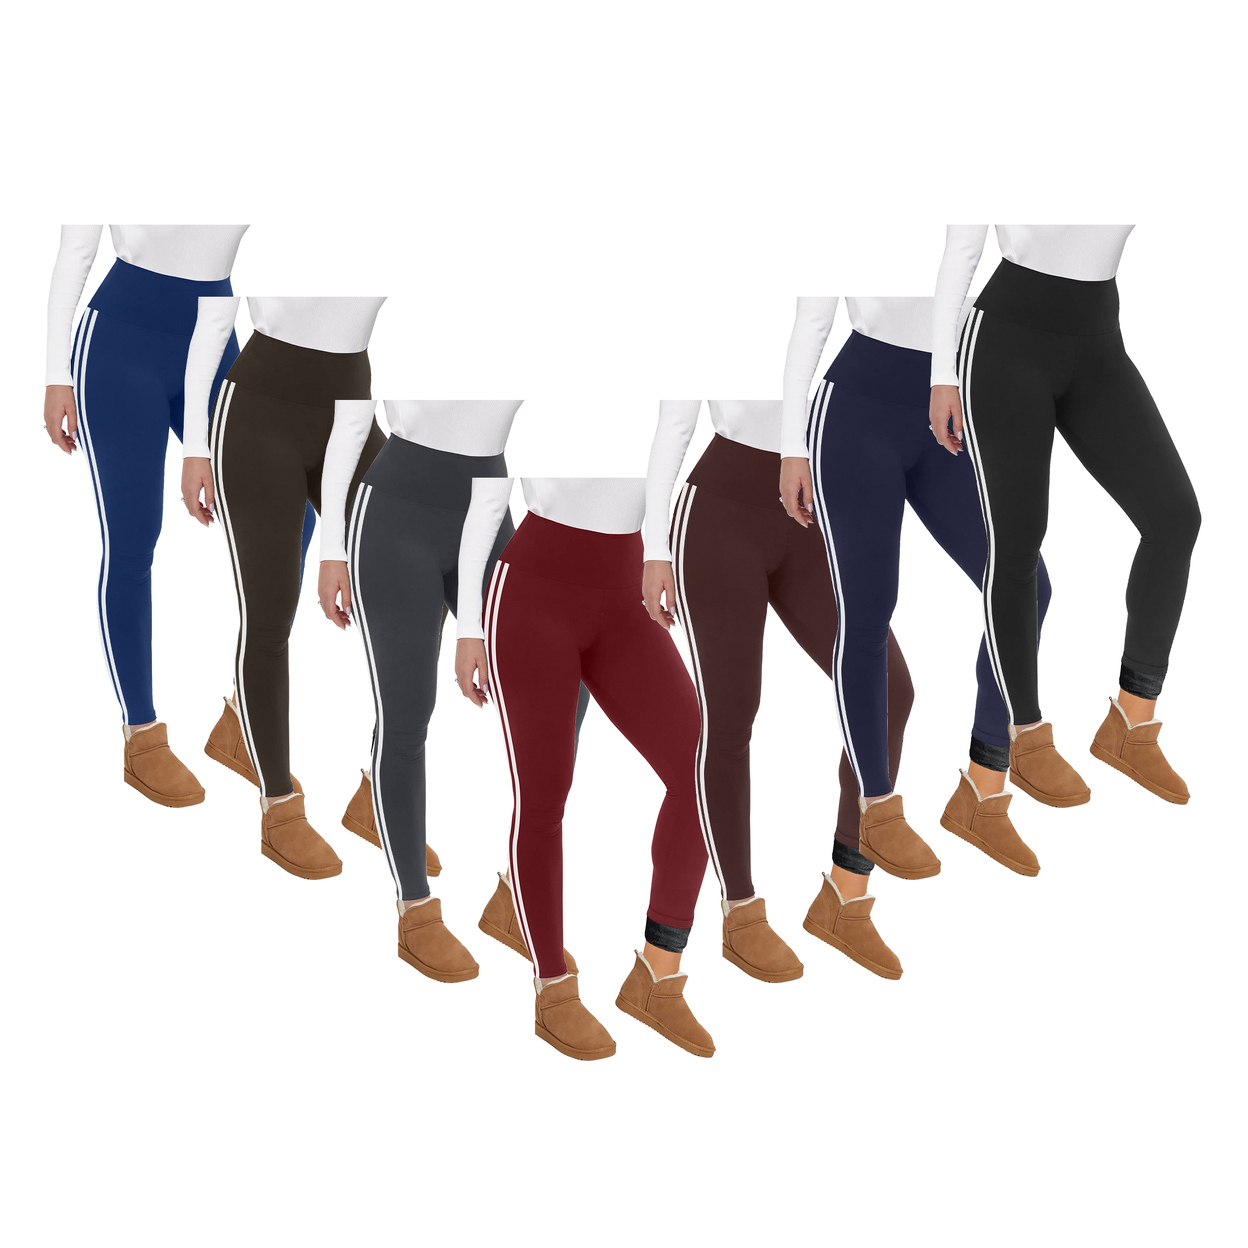 4-Pack: Women's Ultra Soft Winter Warm Cozy Striped Fur Lined Yoga Leggings - Assorted, Large